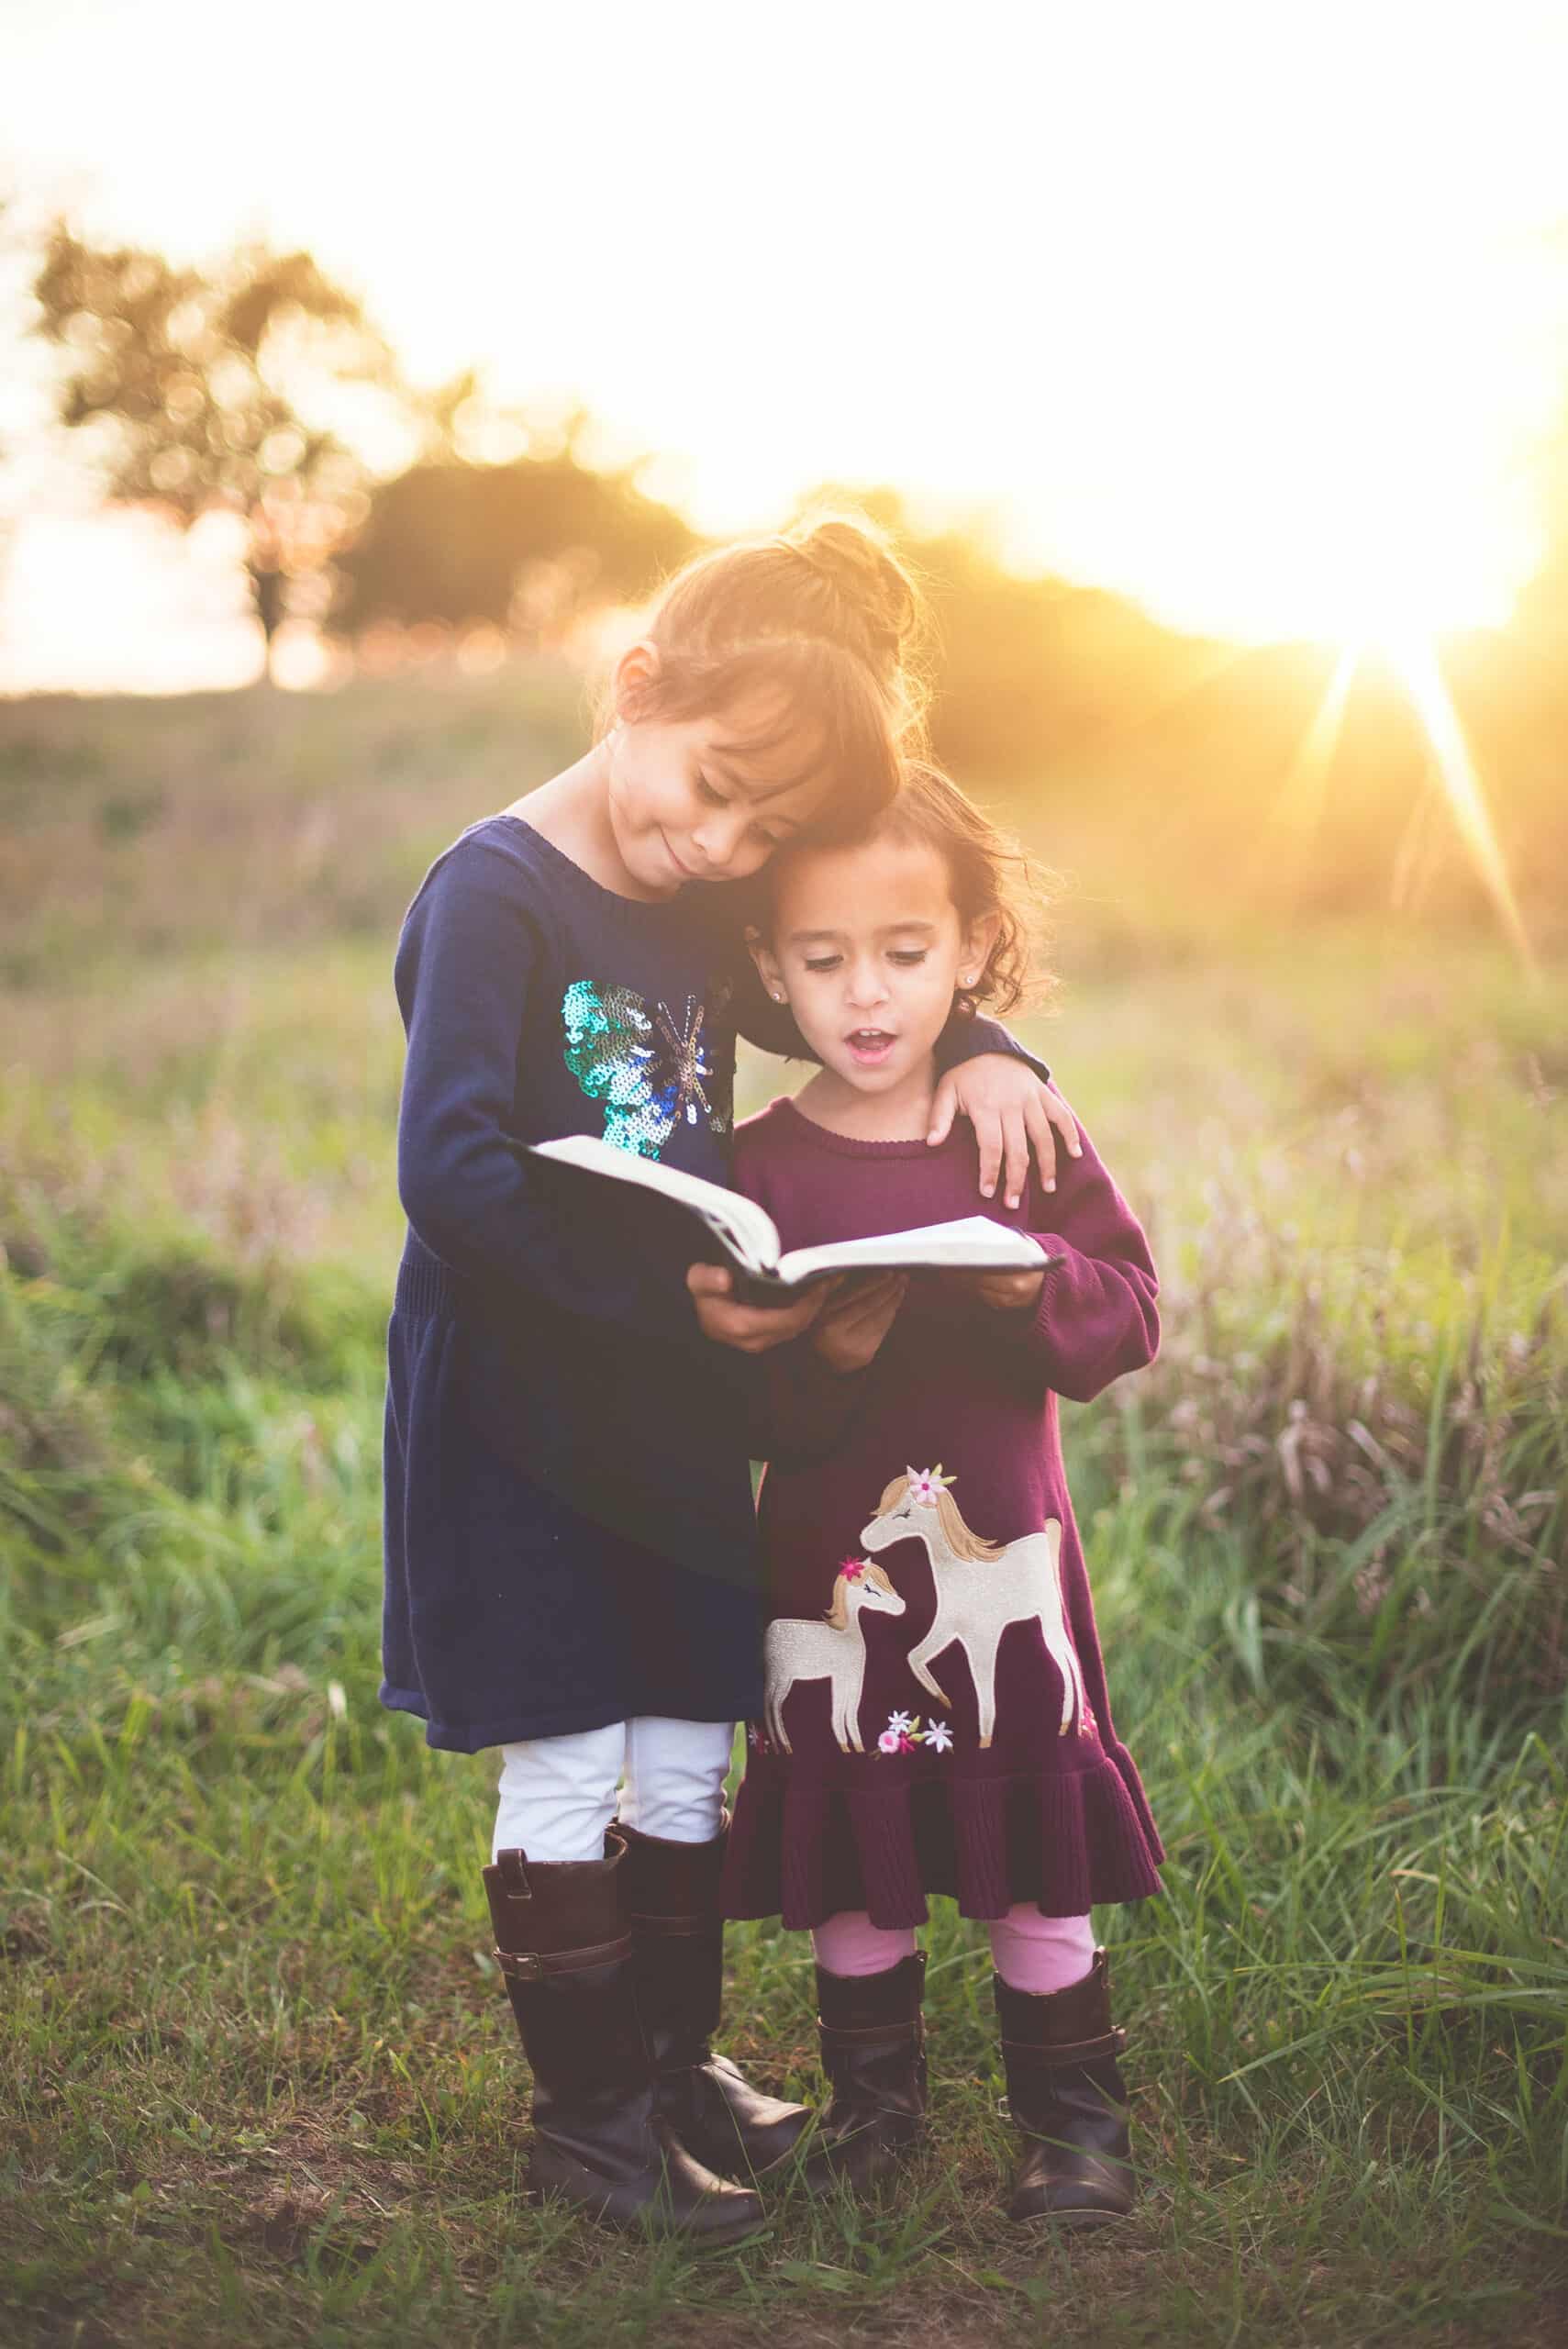 Two young girls engrossed in reading a book together, standing on a lush green lawn.